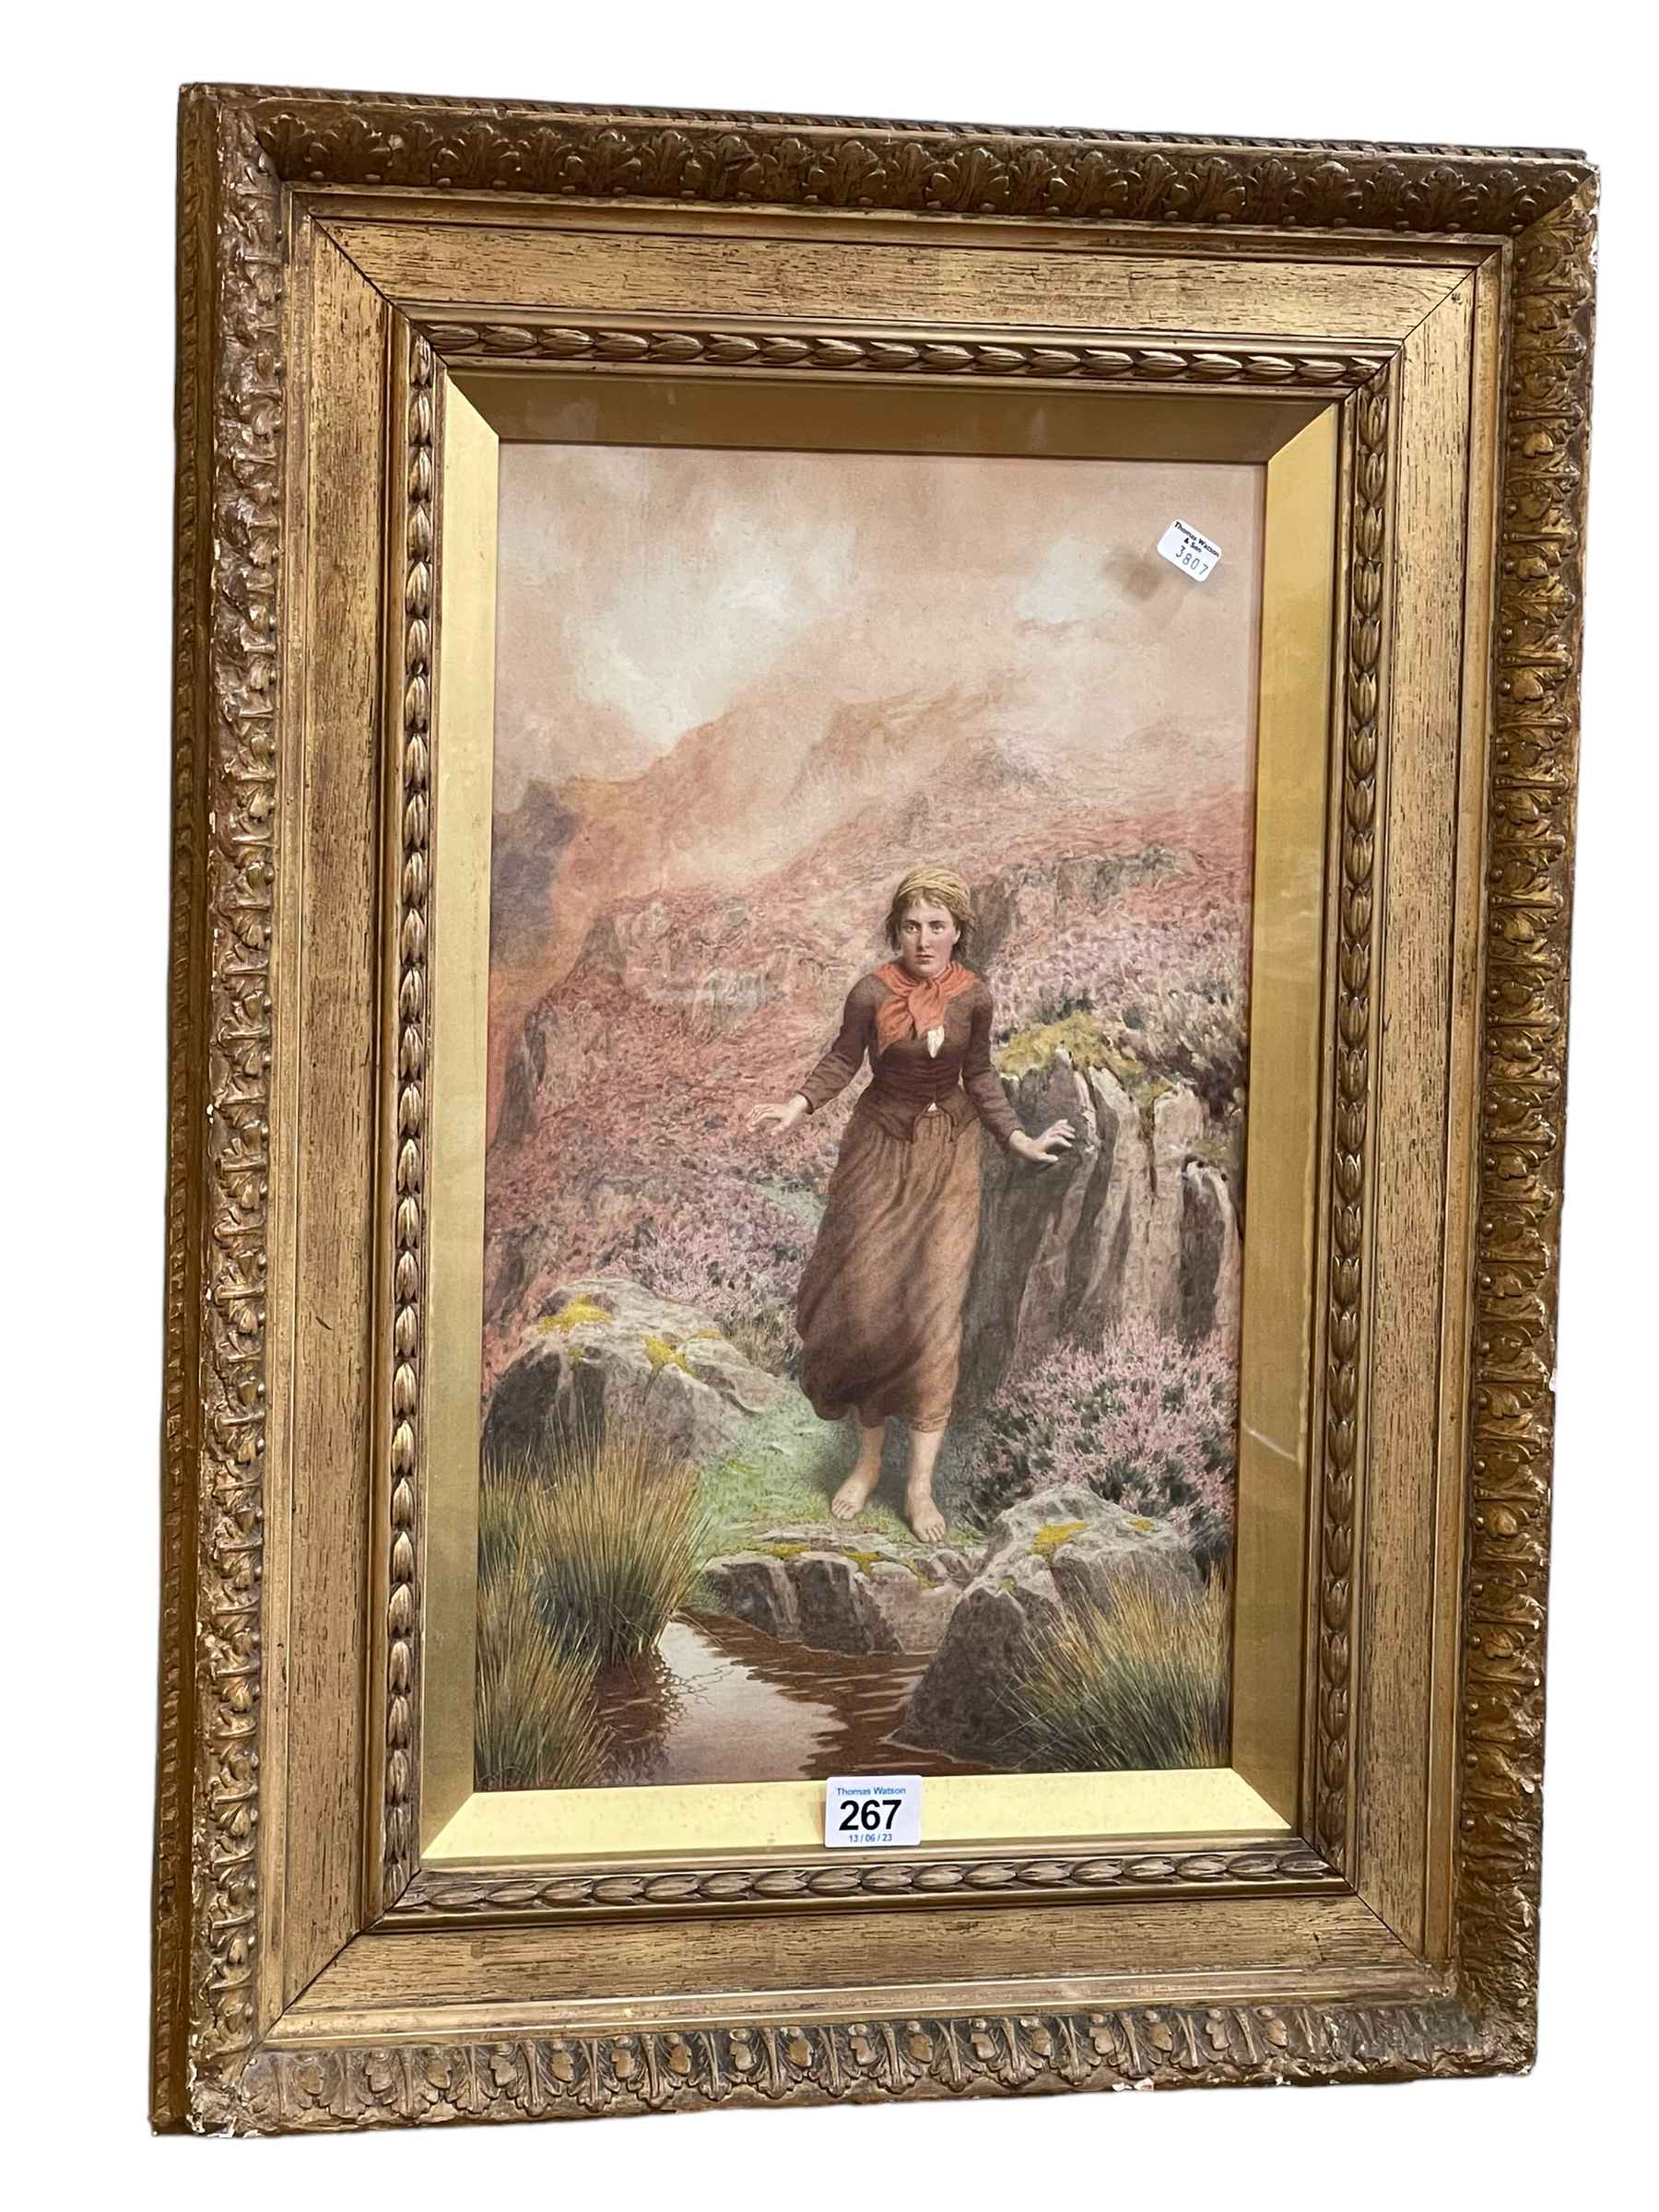 James Barnes, A Doubtful Path, watercolour, signed lower left, 41.5cm by 24.